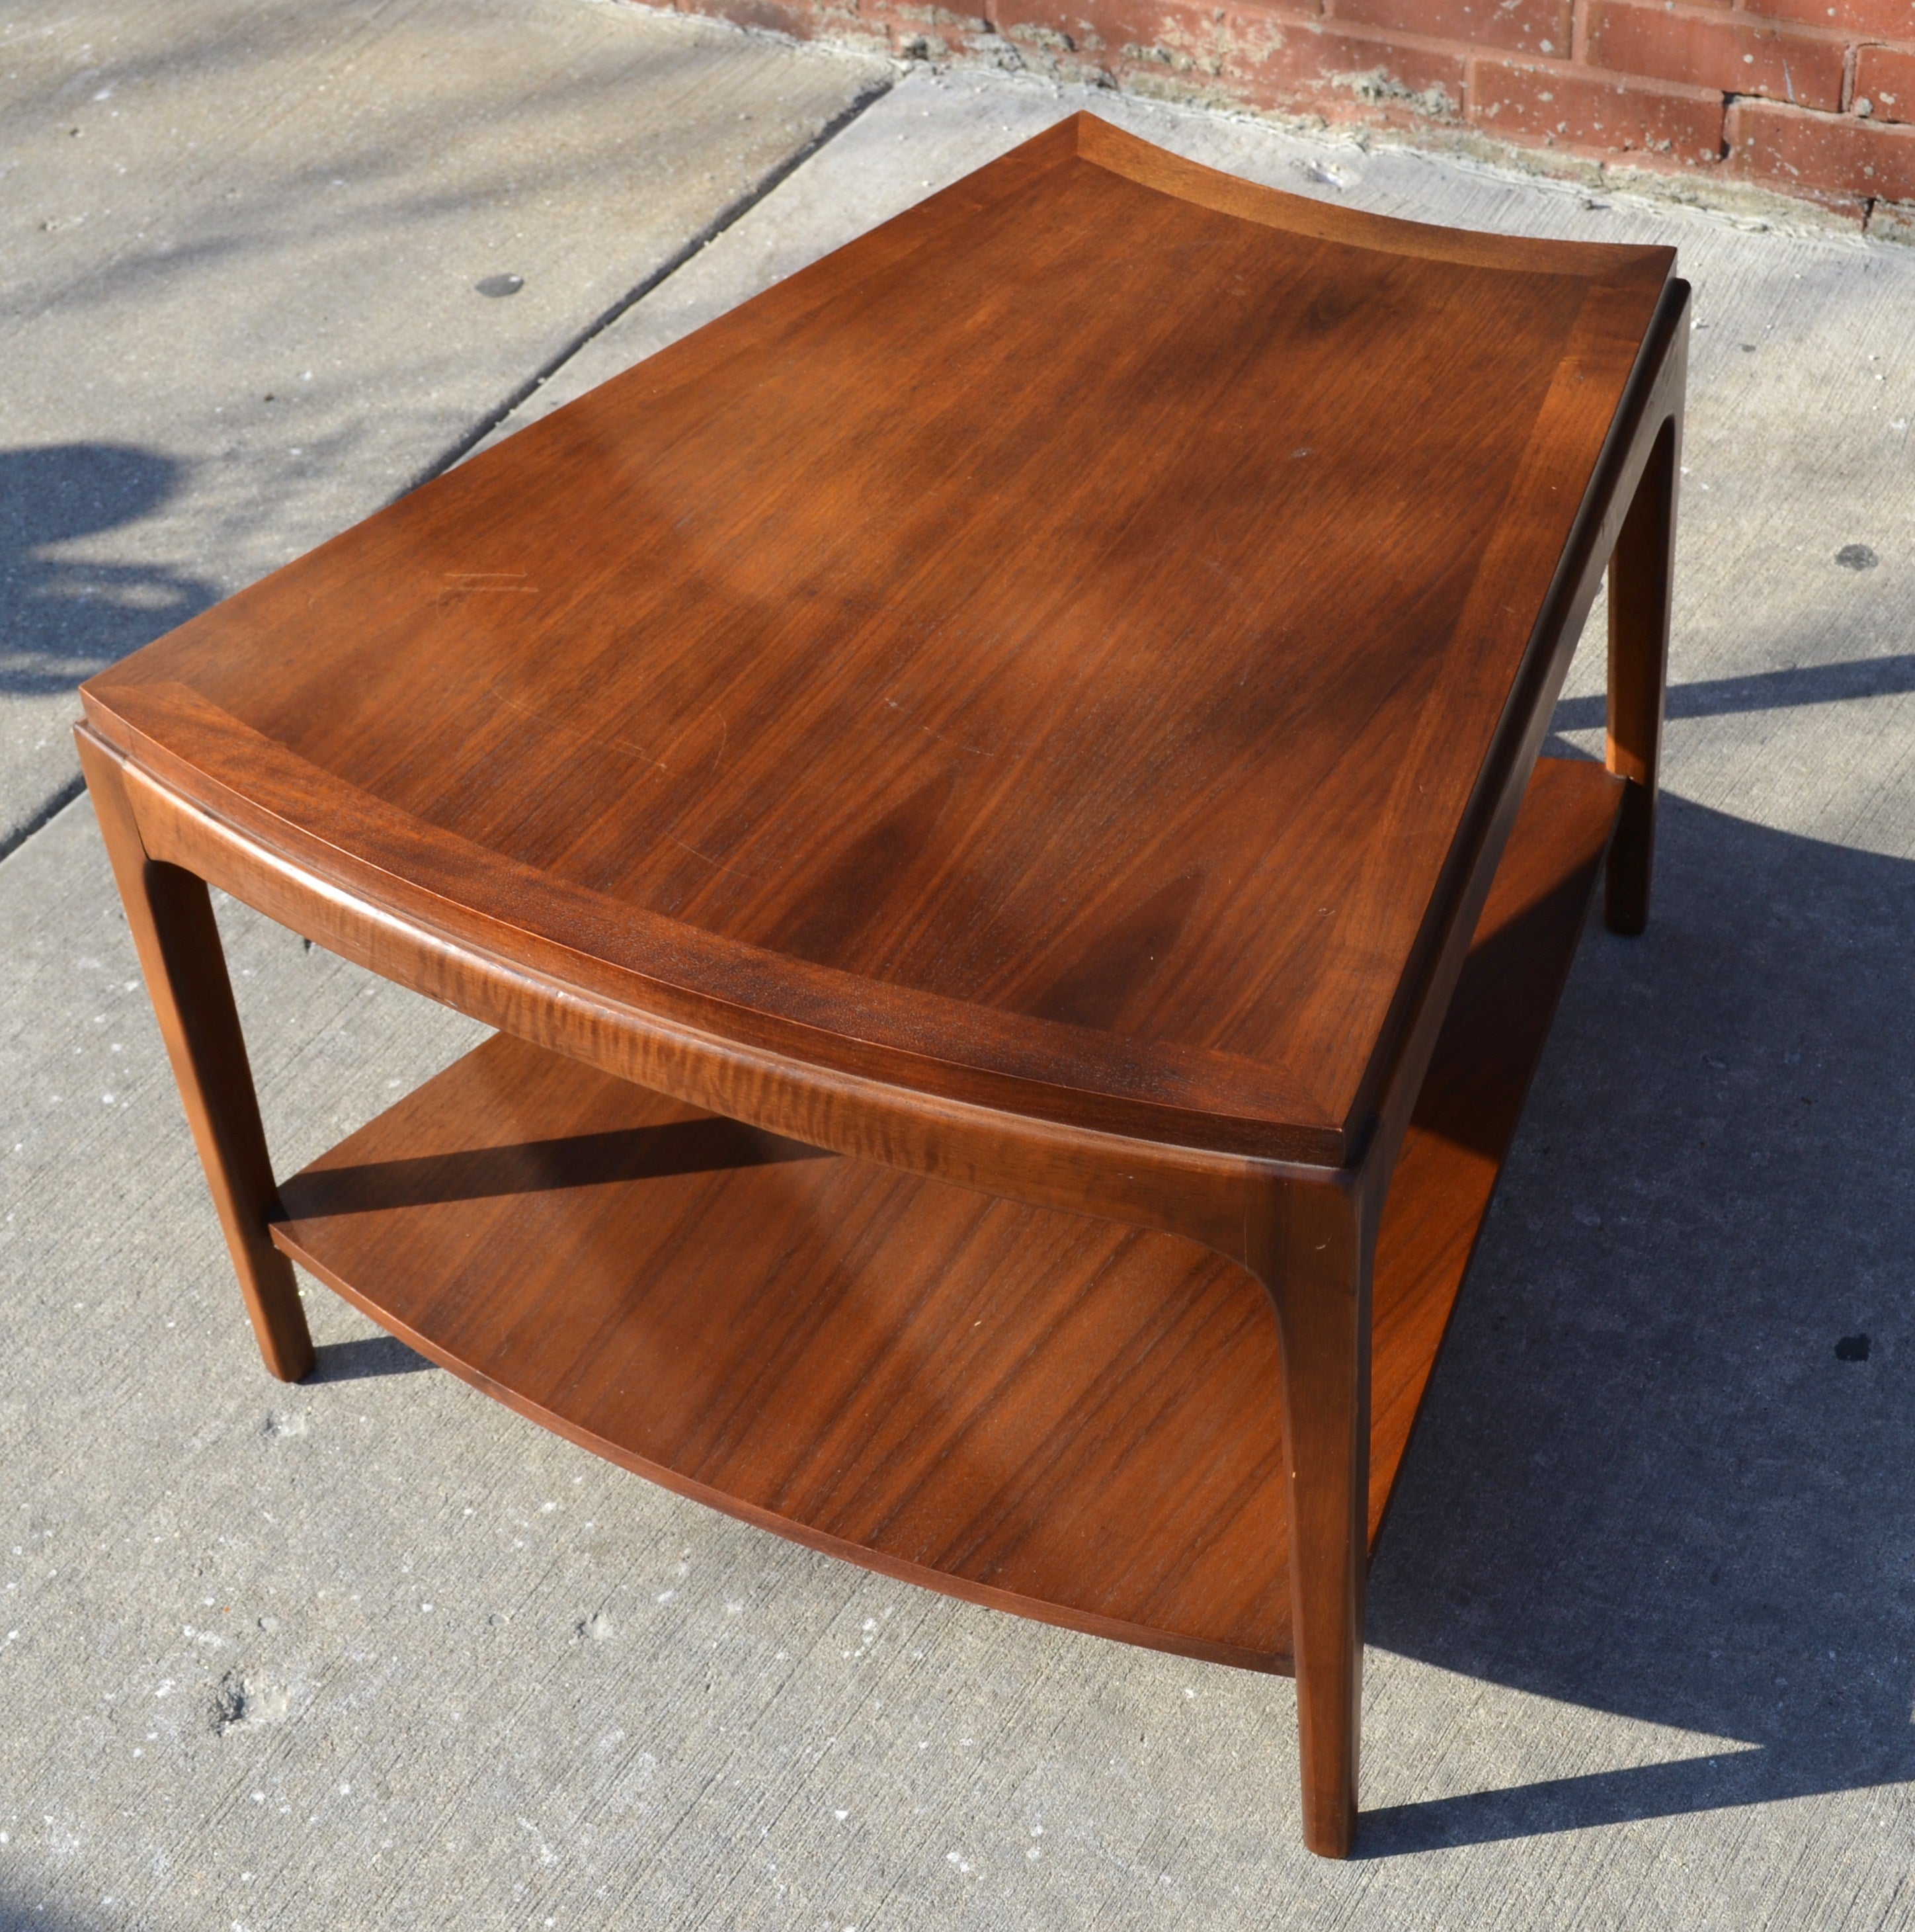 Wedge Shaped Two tier Side Table